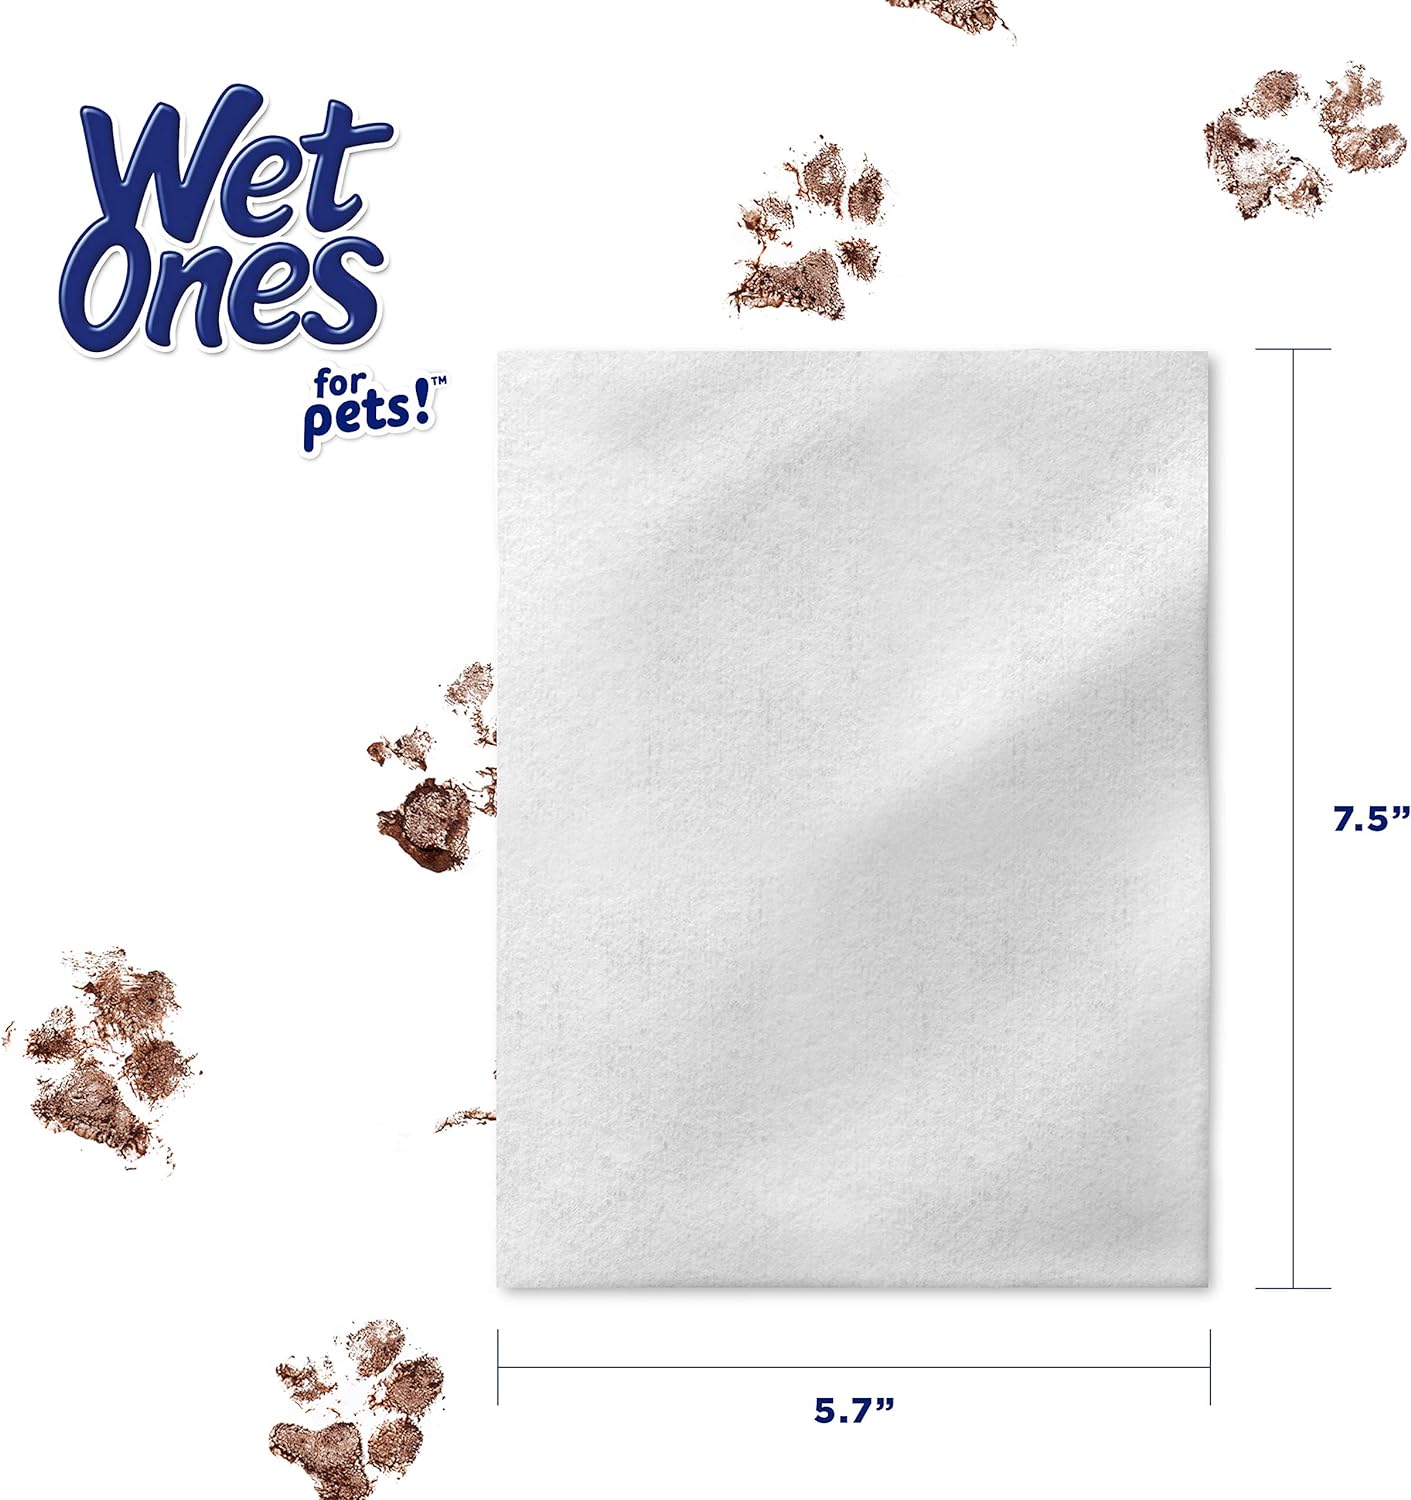 Wet Ones for Pets Hypoallergenic Multi-Purpose Dog Wipes with Vitamins A, C & E | Fragrance-Free Hypoallergenic Dog Wipes for All Dogs Wipes with Wet Lock Seal | 30 Count Pouch Dog Wipes : Pet Supplies